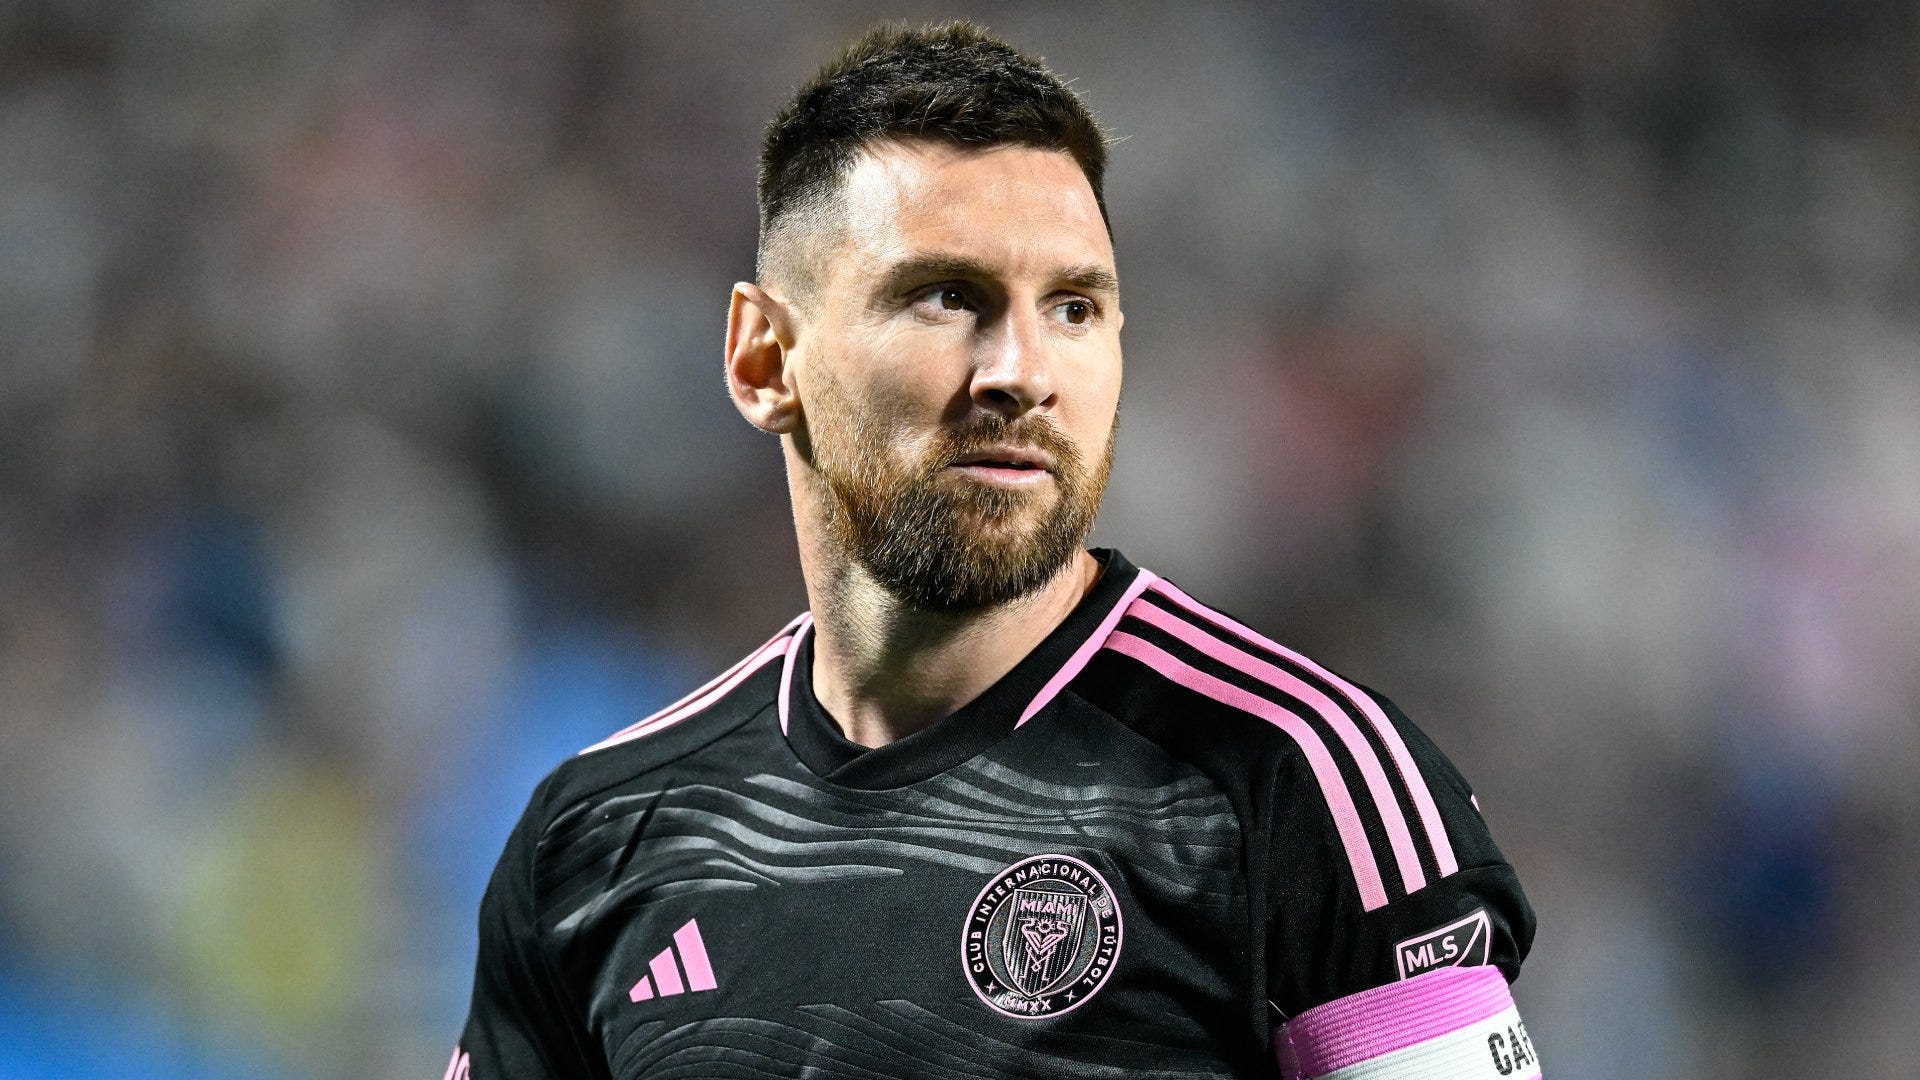 Messi ranked 4th best-paid celebrity by Forbes - Football | Tribuna.com